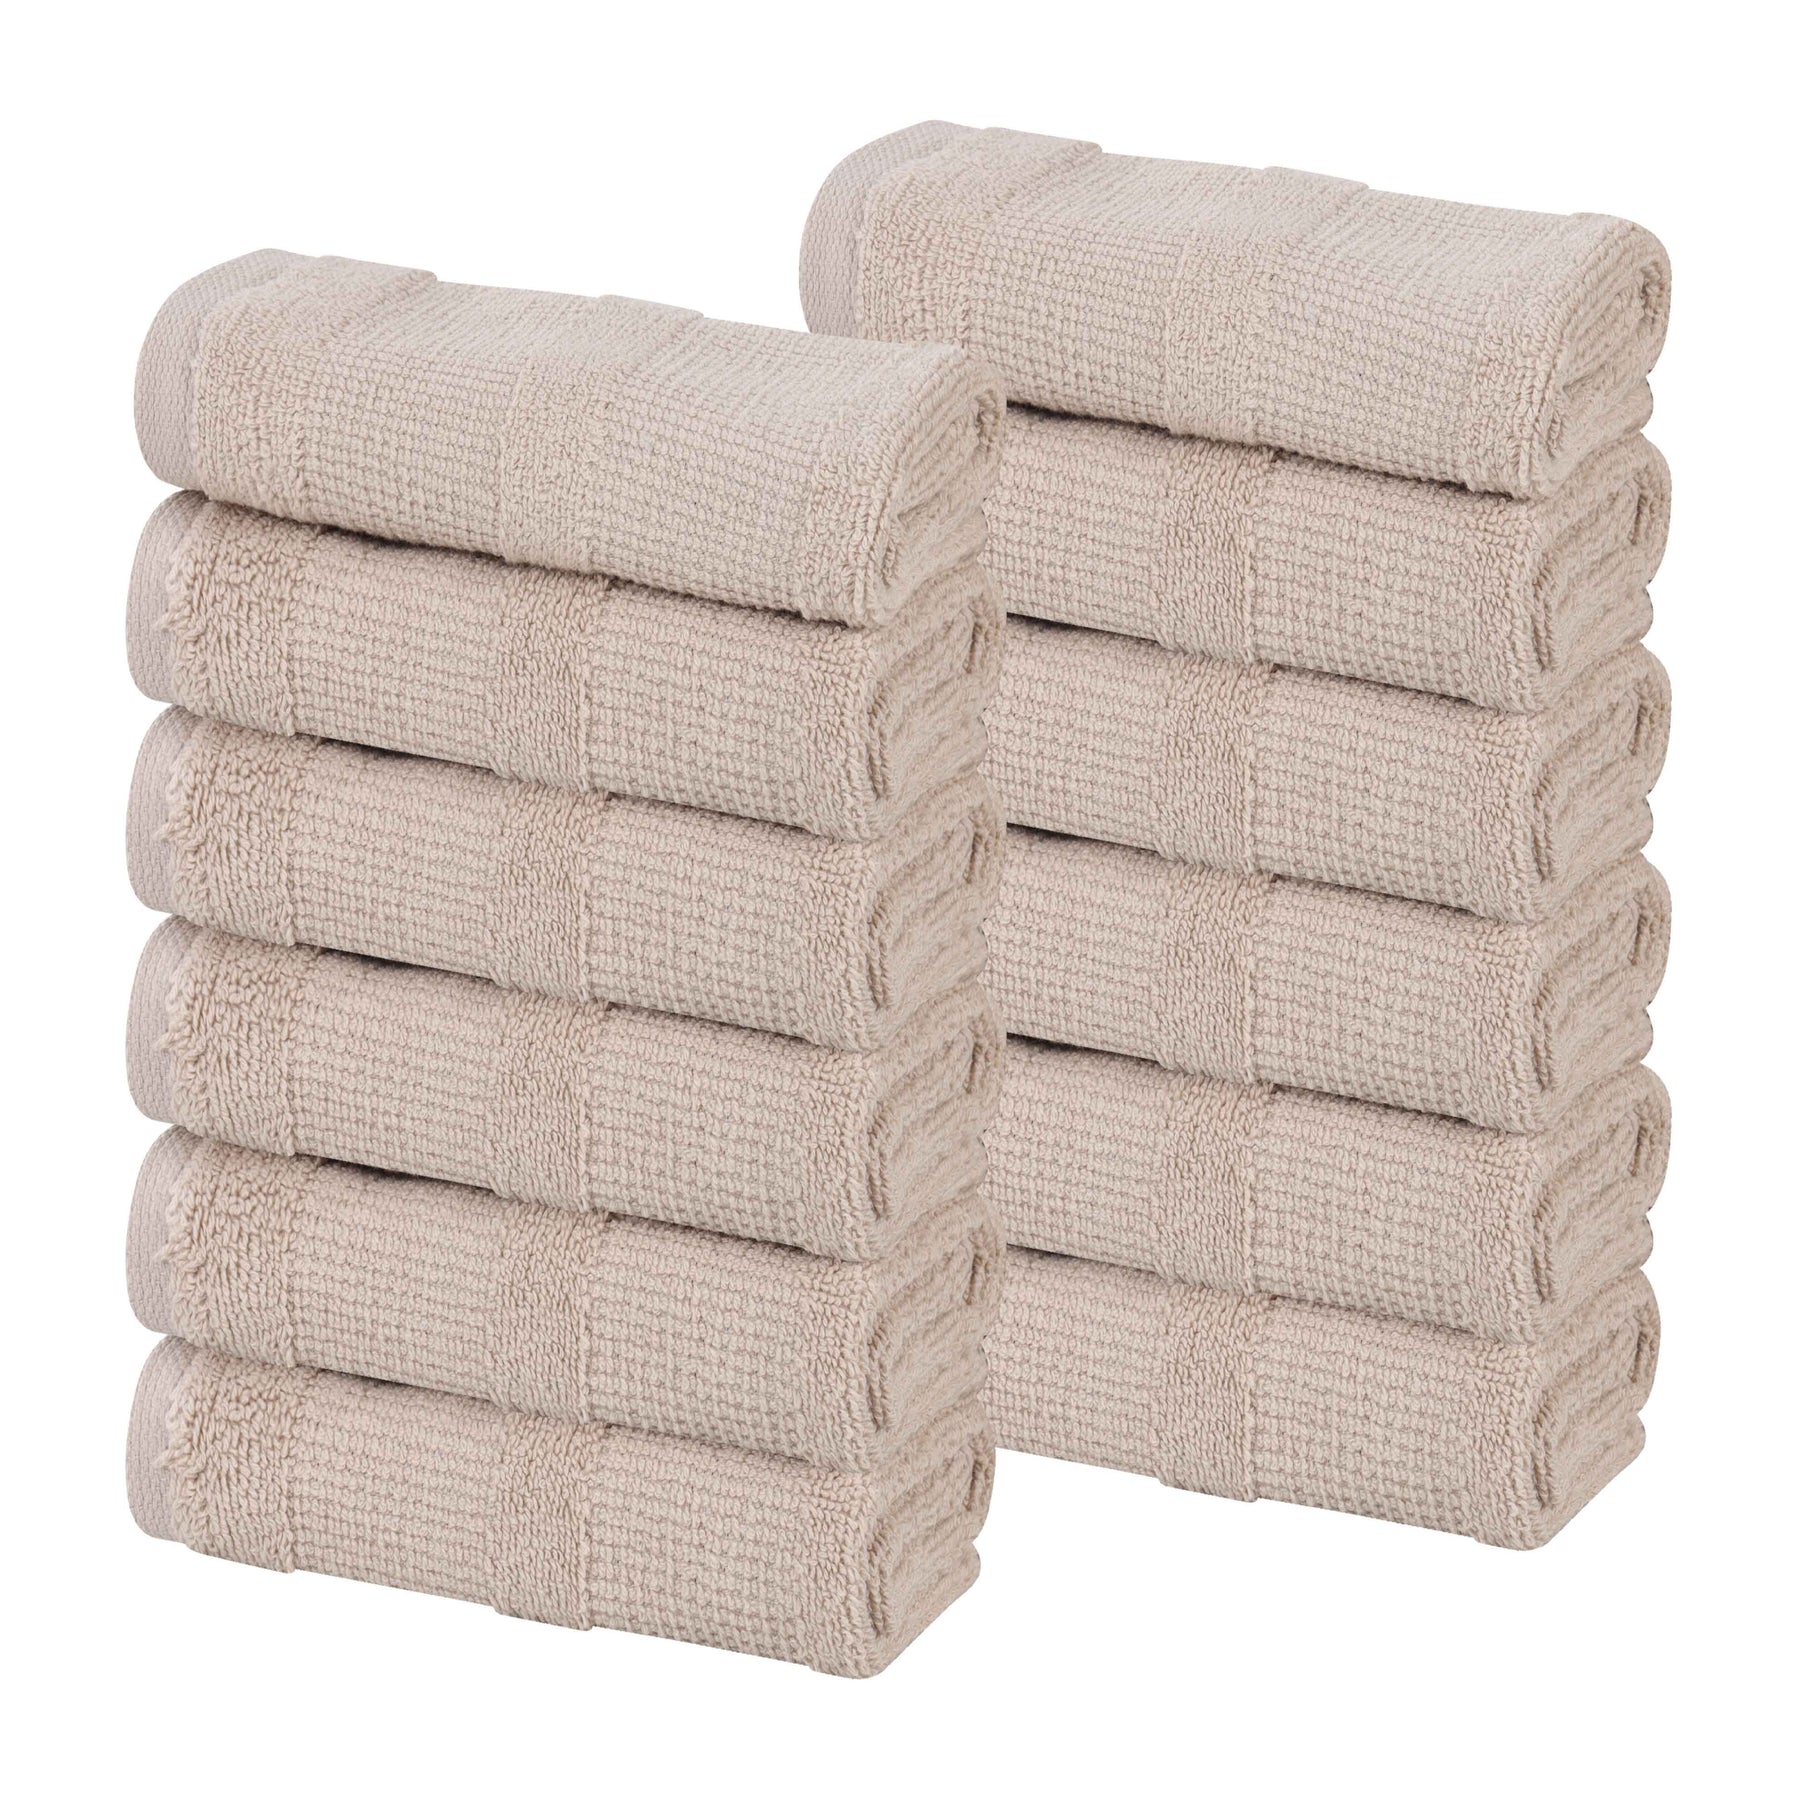 Roma Cotton Ribbed Textured Soft Face Towels/ Washcloths - Stone